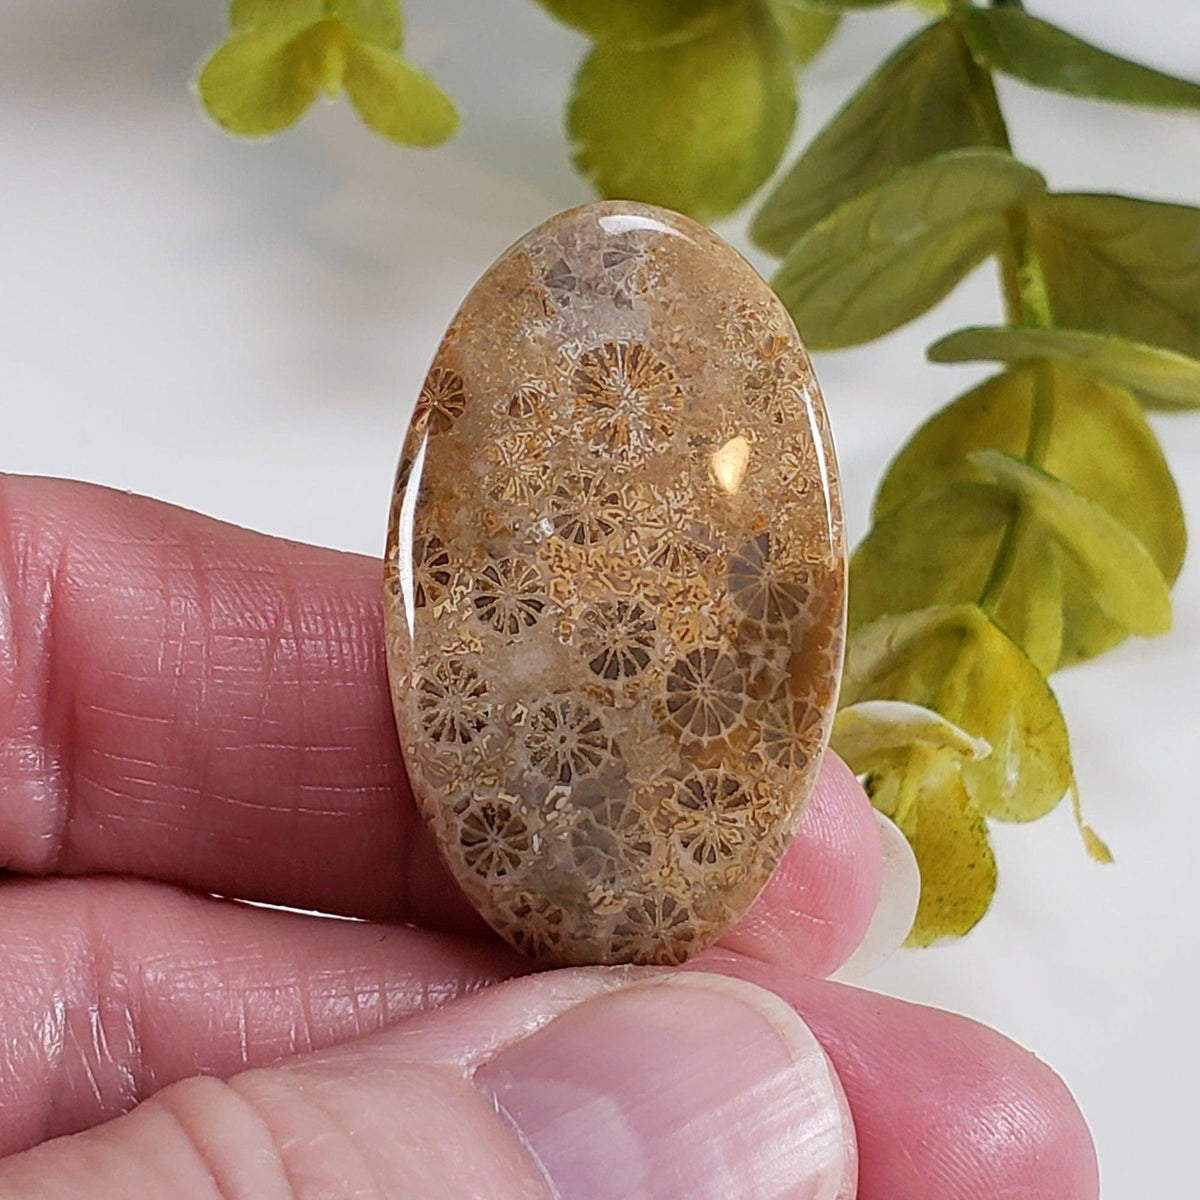 Chrysanthemum Coral Fossil | Fossilized Coral Untreated | 37.6x22.5mm 39.40ct | Polished Gemstone Cabochon | Africa